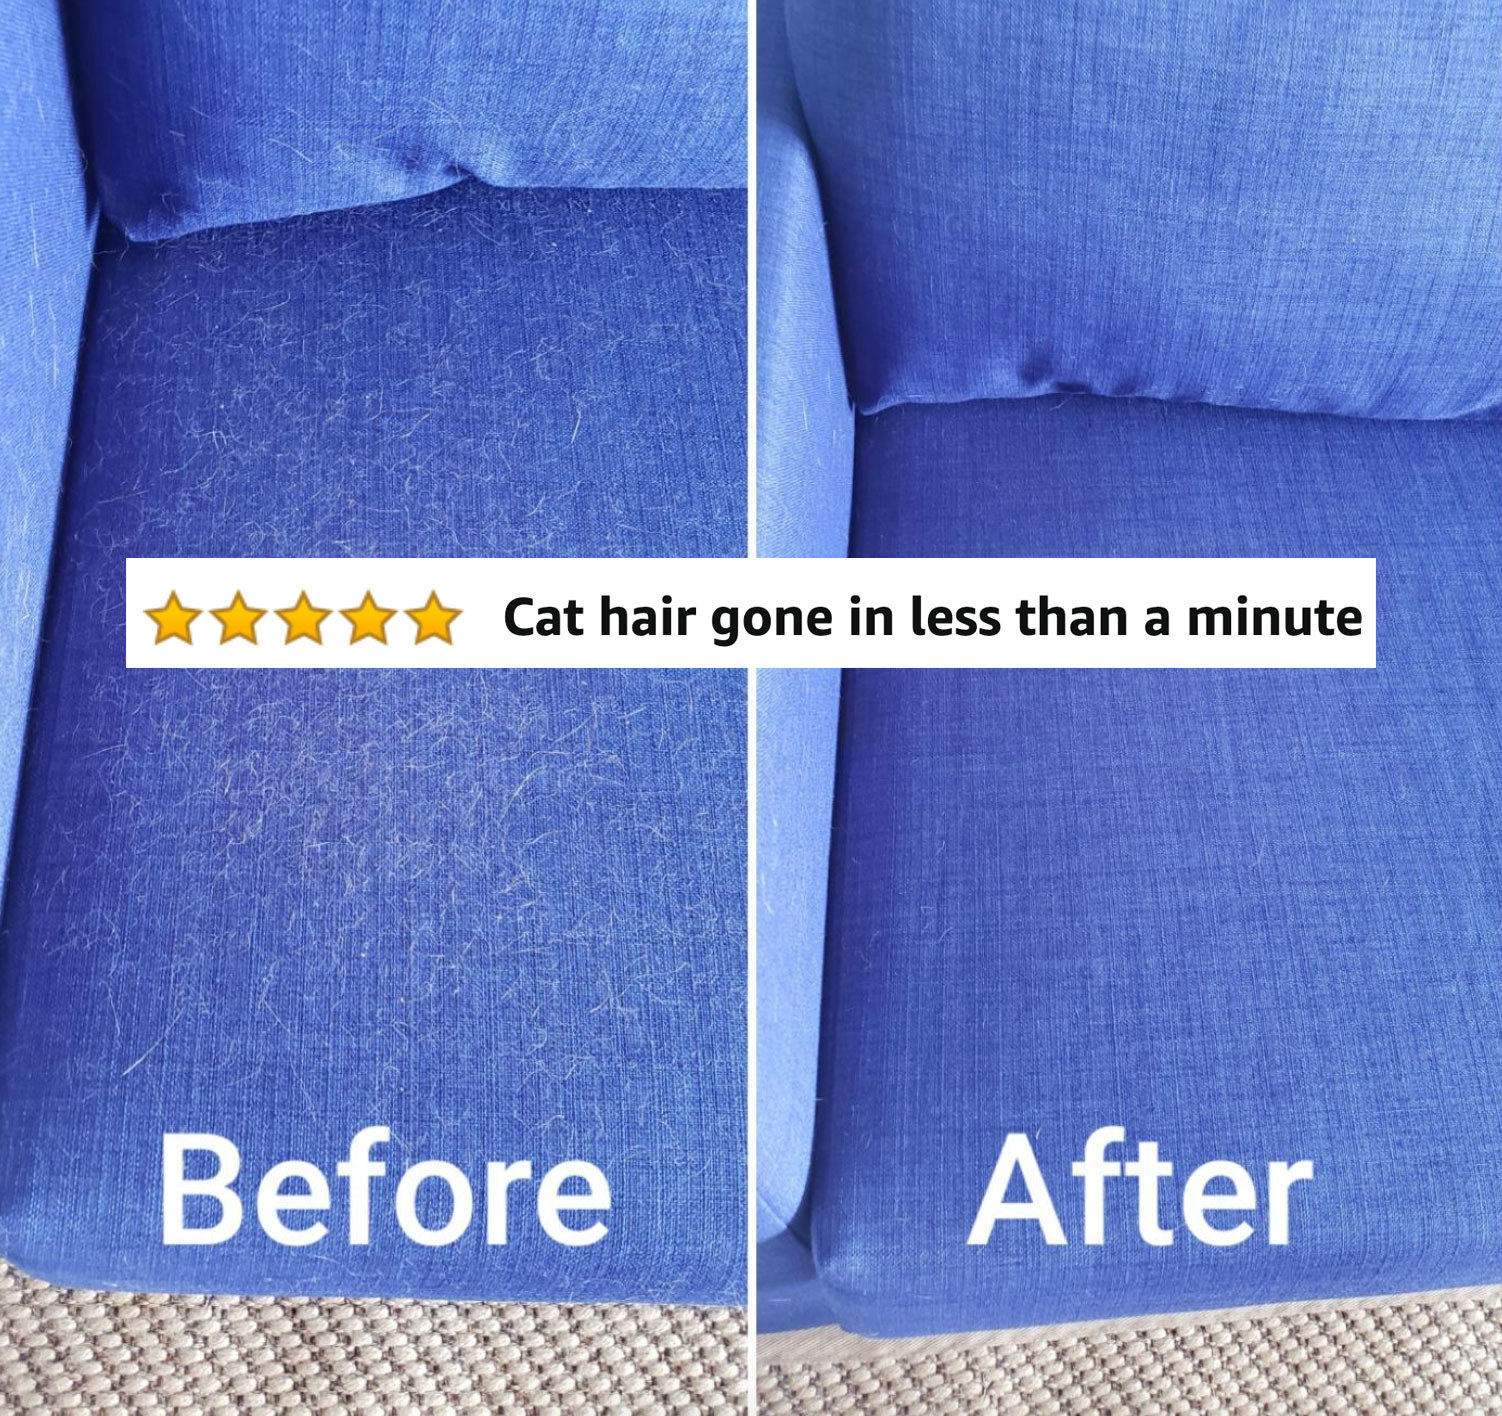 a reviewer before and after photo of a couch full of cat hair and then the same couch clean and a review that says &quot;cat hair gone in less than a minute&quot;